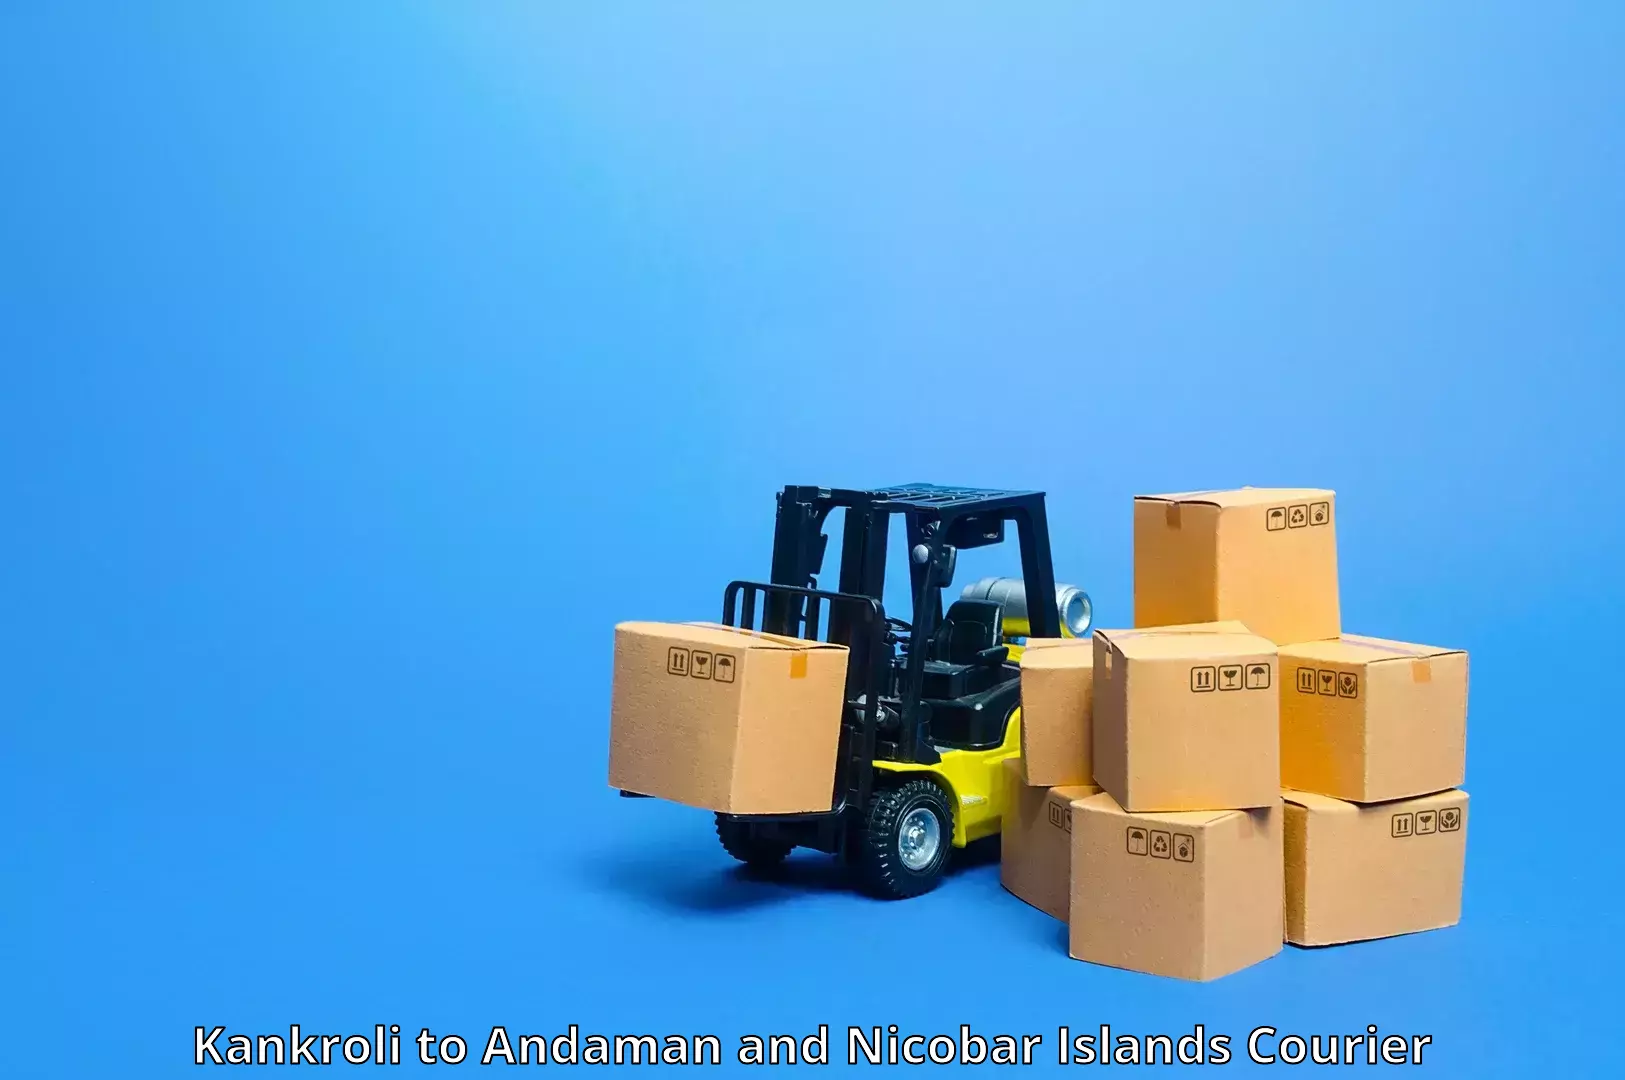 Personal parcel delivery in Kankroli to North And Middle Andaman